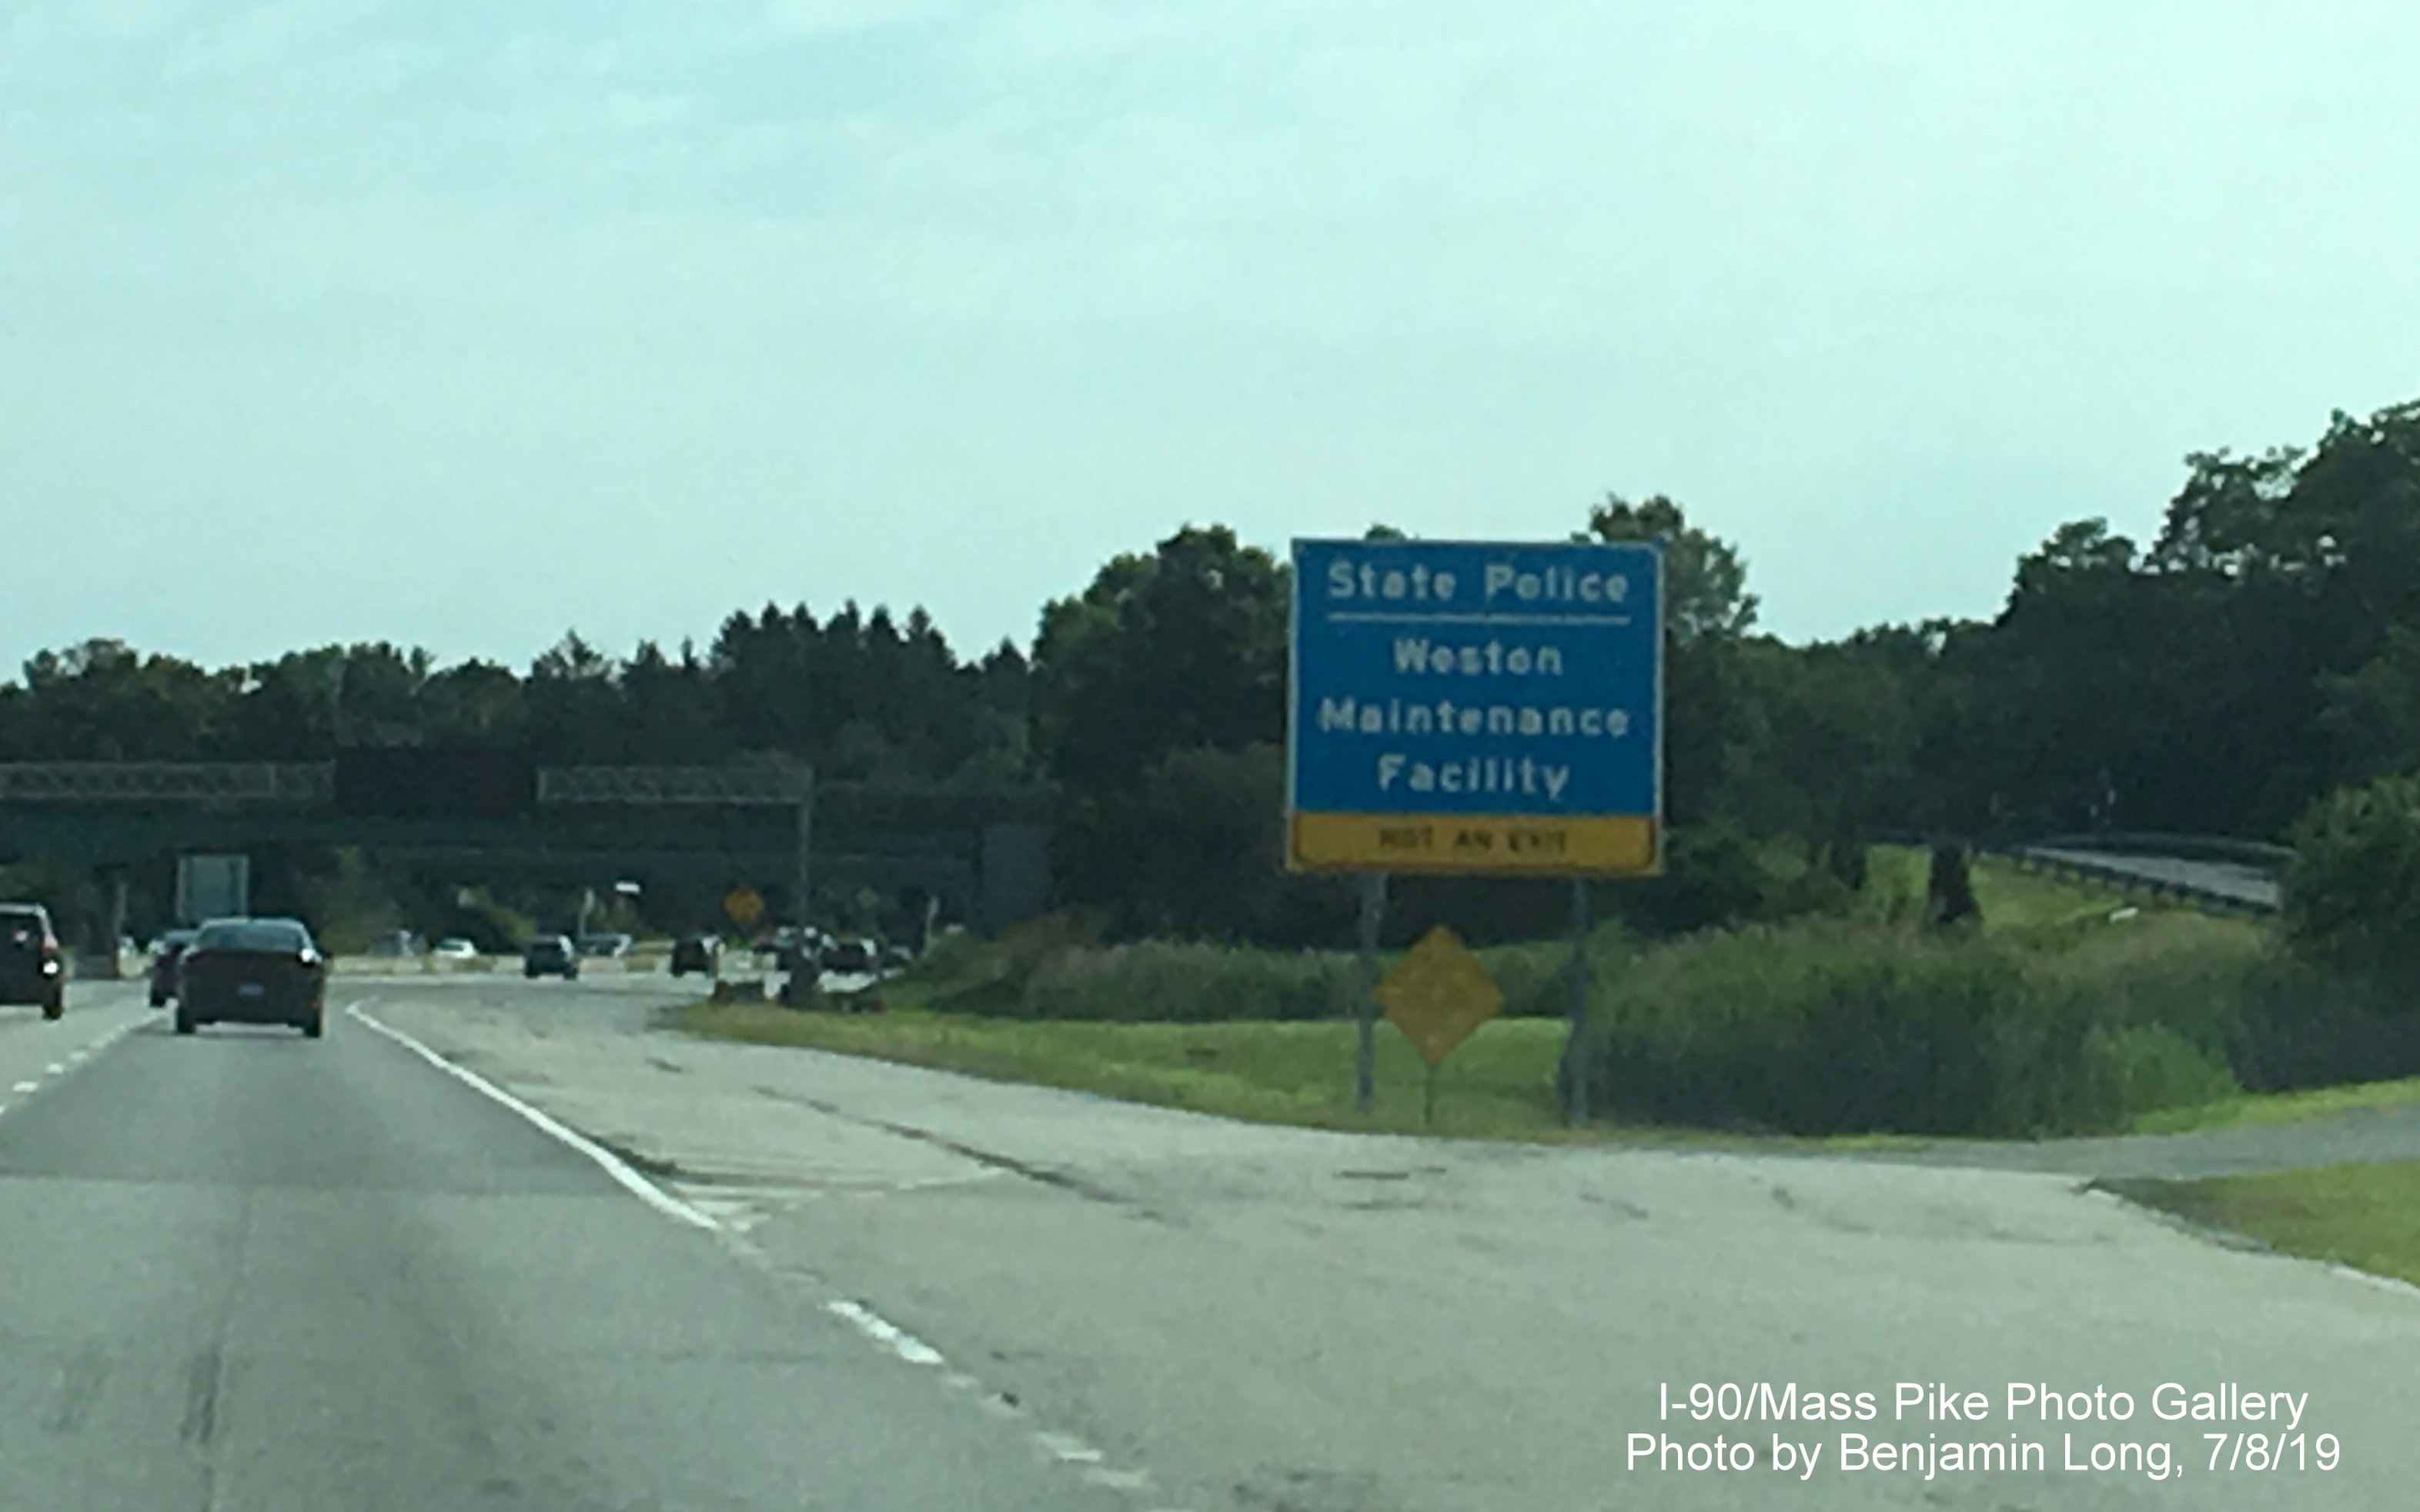 Image of blue entrance sign for Weston State Police Barracks/Maintenance Facility on I-90/Mass Pike East, by Benjamin Long